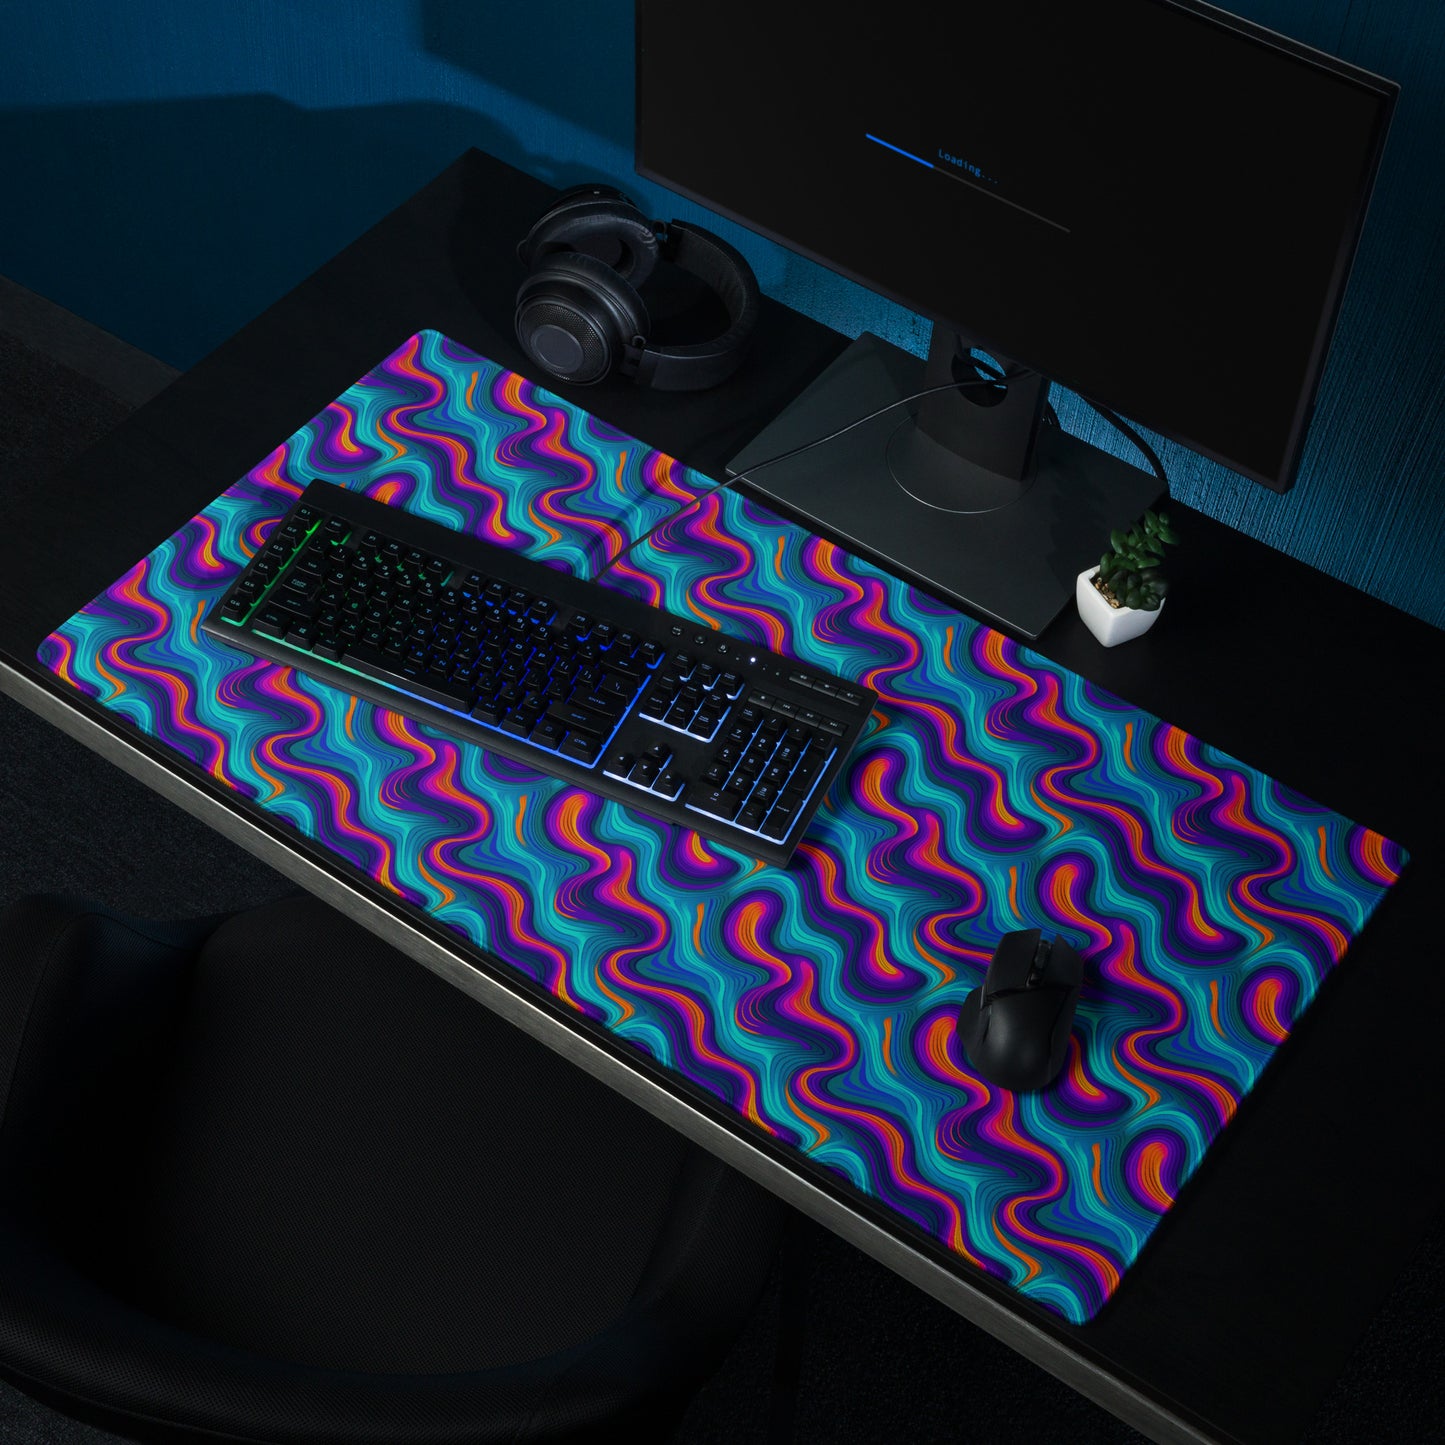 A 36" x 18" desk pad with blue and orange wavy pattern sitting on a desk